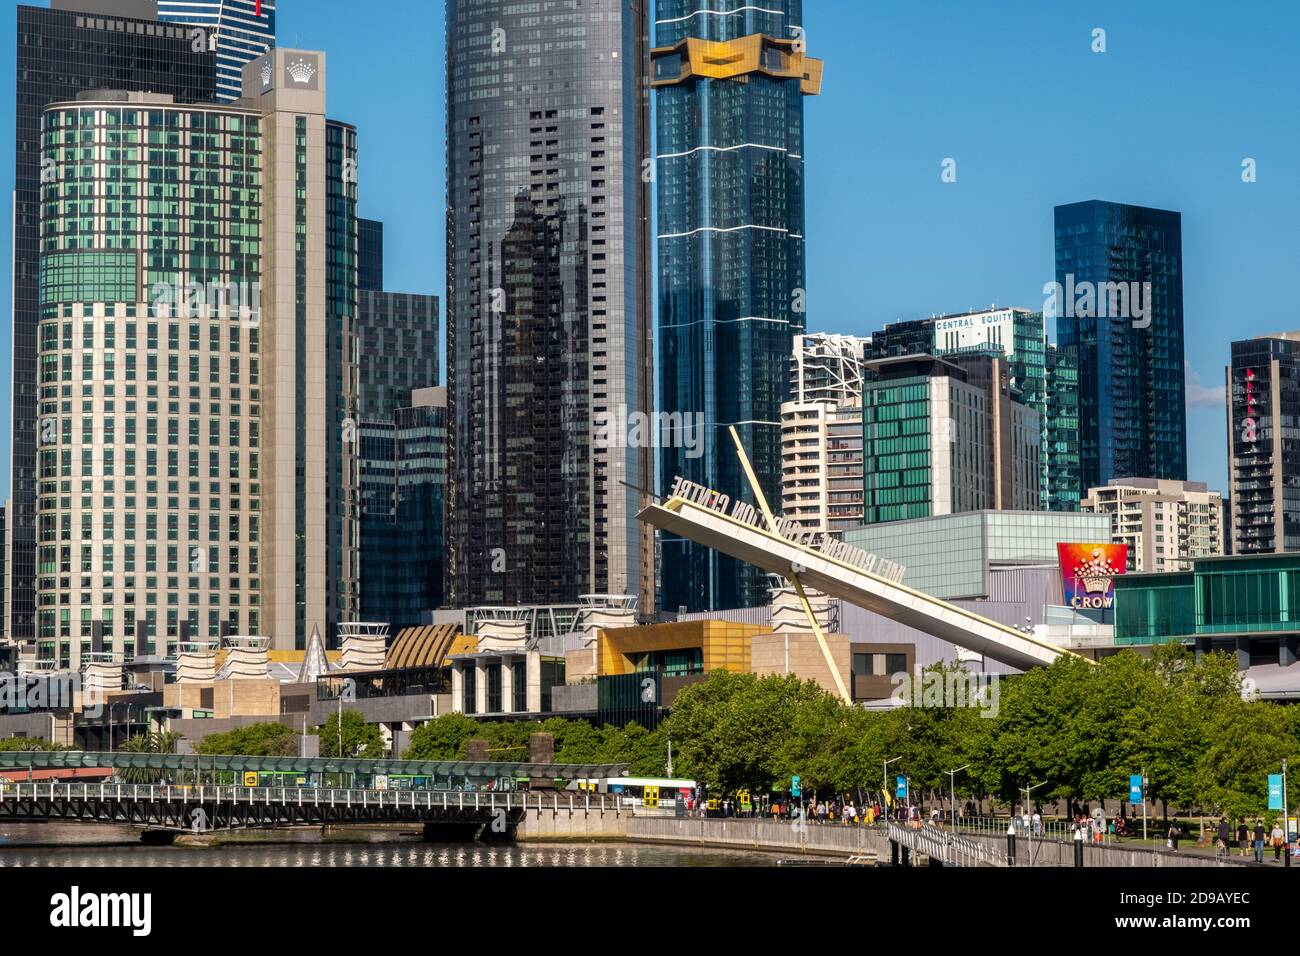 The Melbourne city skyline on the Yarra river. Stock Photo